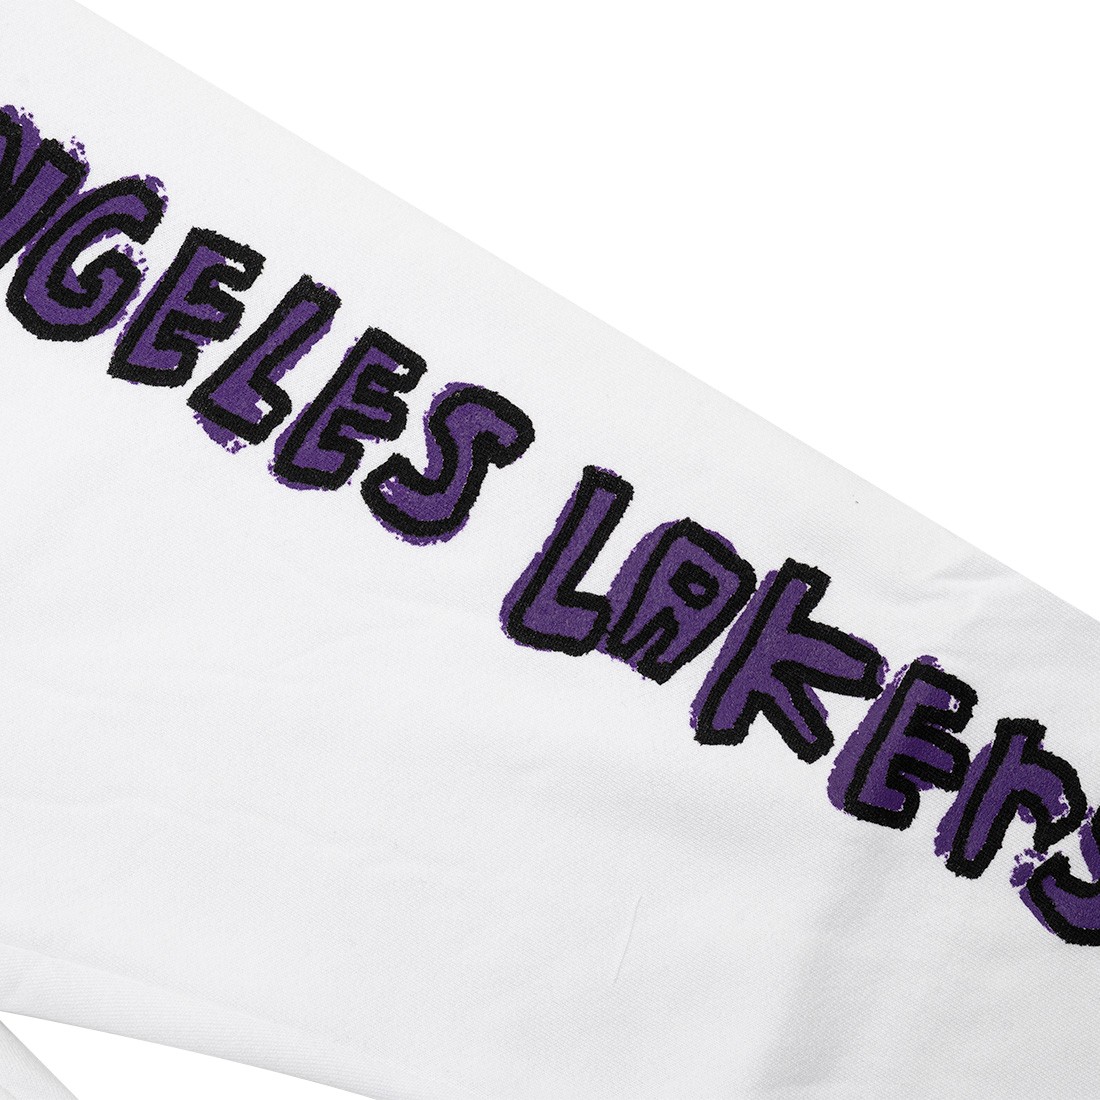 After School Special x NBA Men Lakers Doodle Shorts (white)